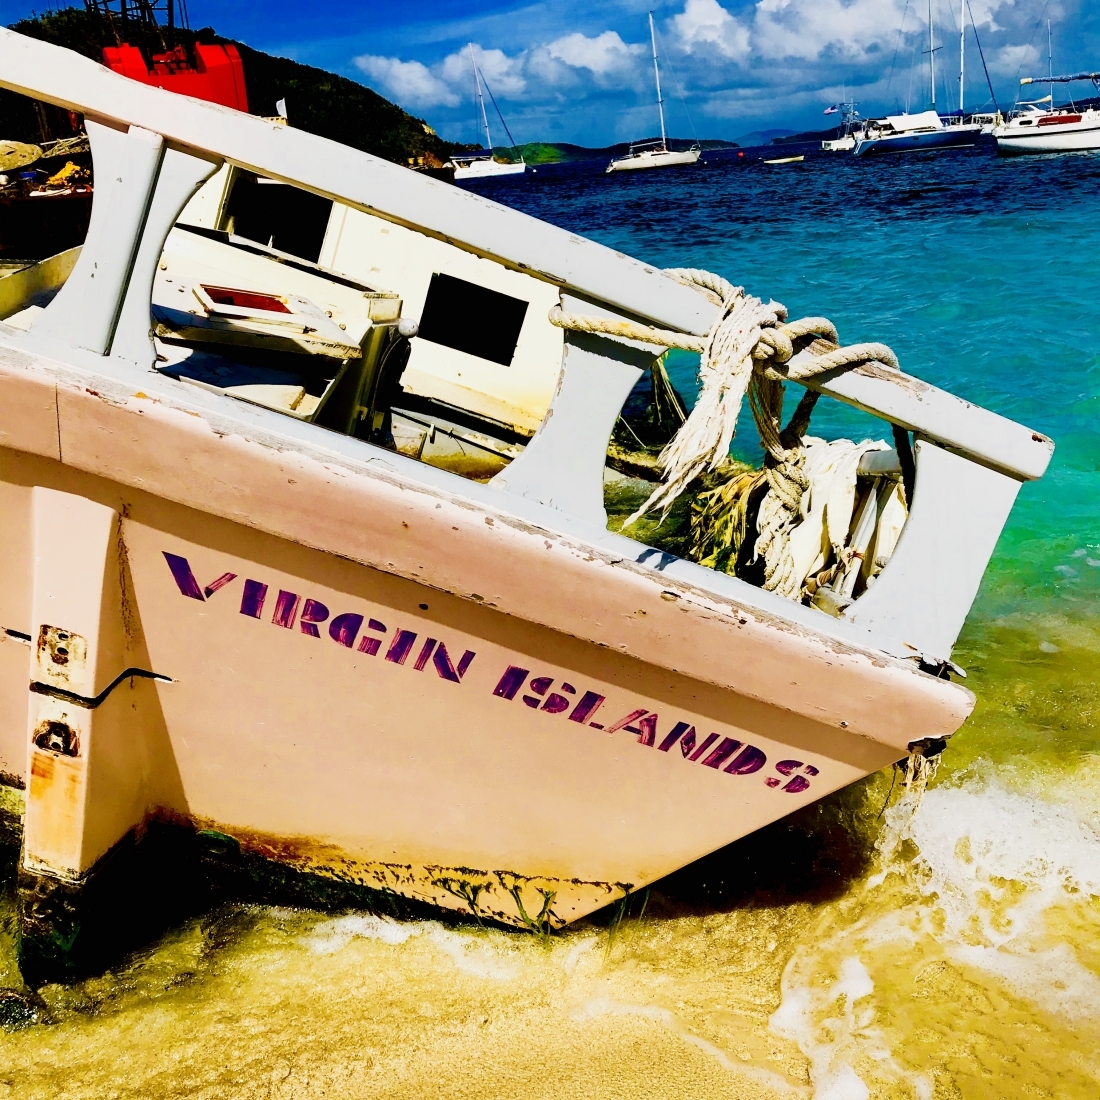 A beached vessel with the text "Virgin Islands" on the back.